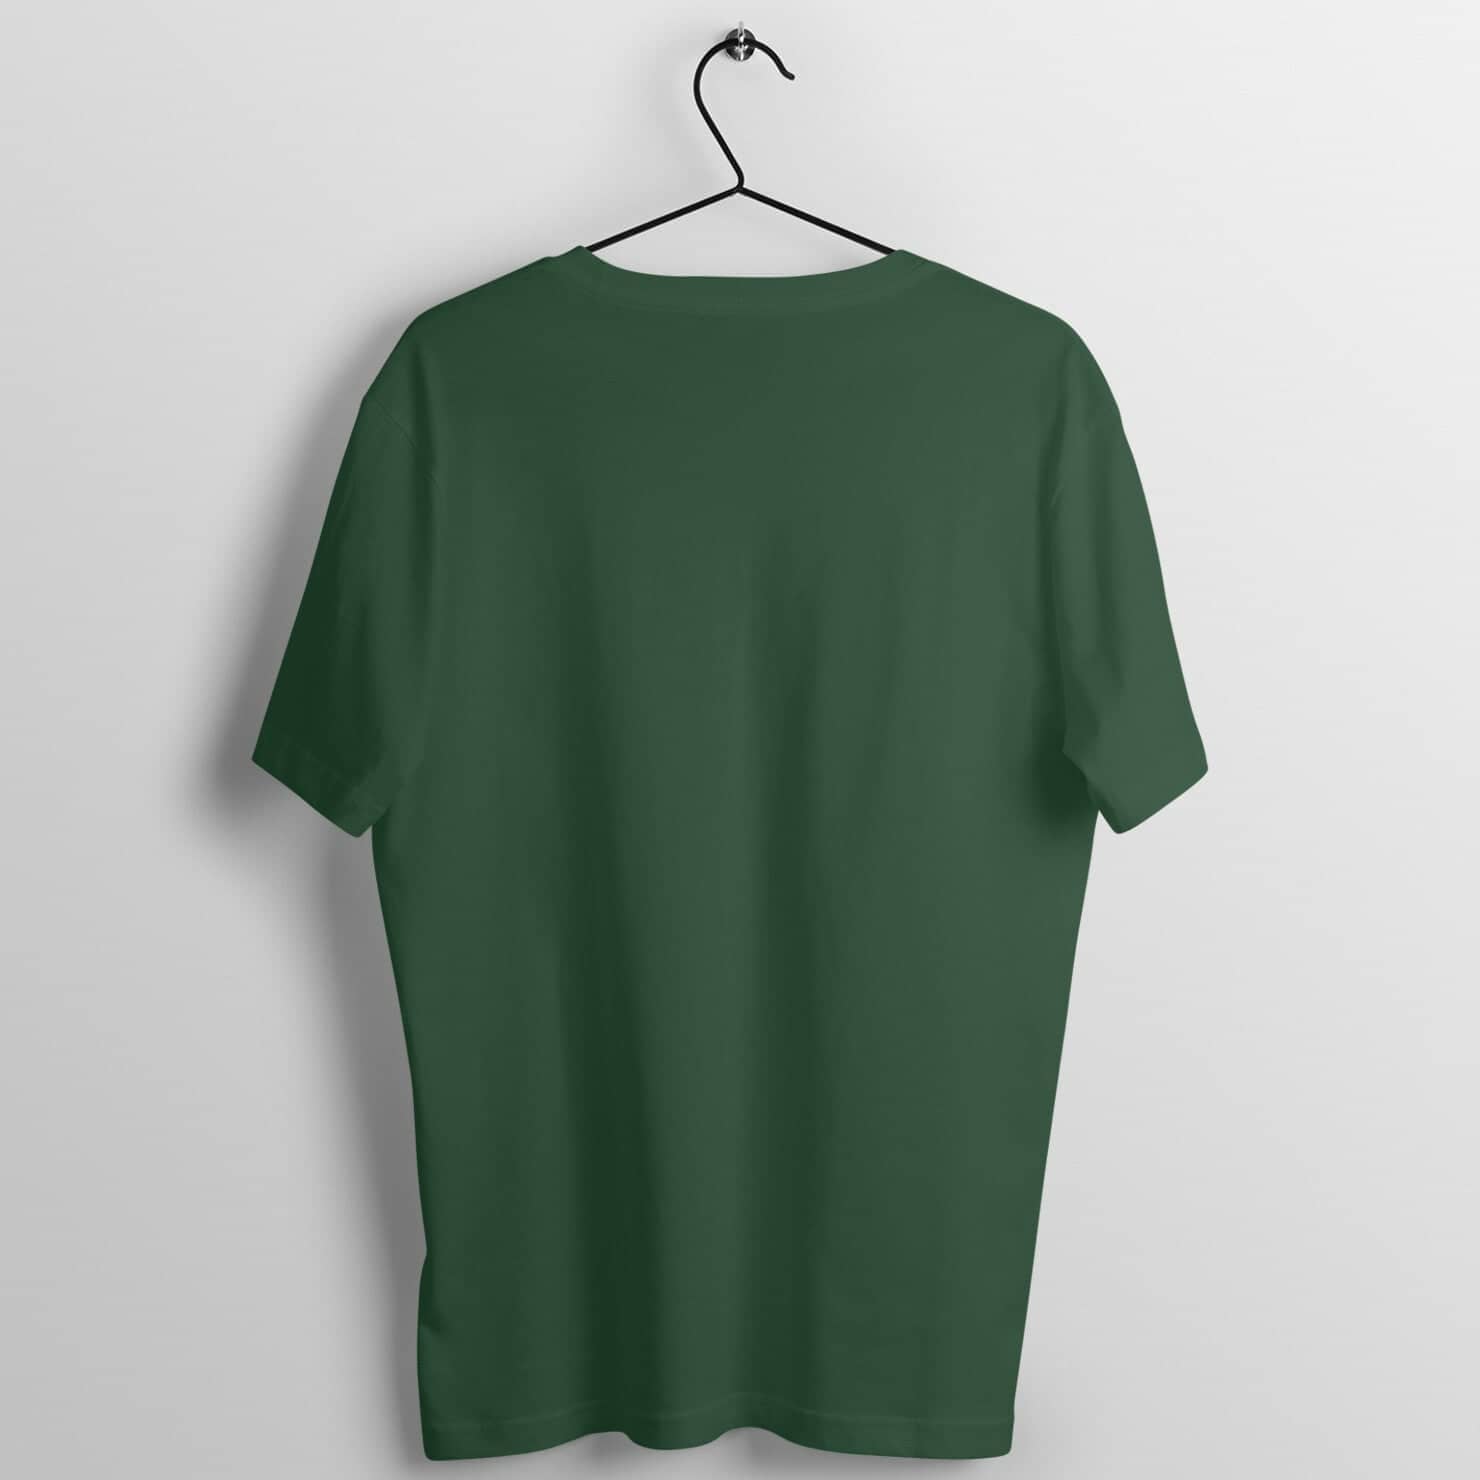 Words cannot Express How Much I Don't Care Exclusive Olive Green T Shirt for Men and Women freeshipping - Catch My Drift India